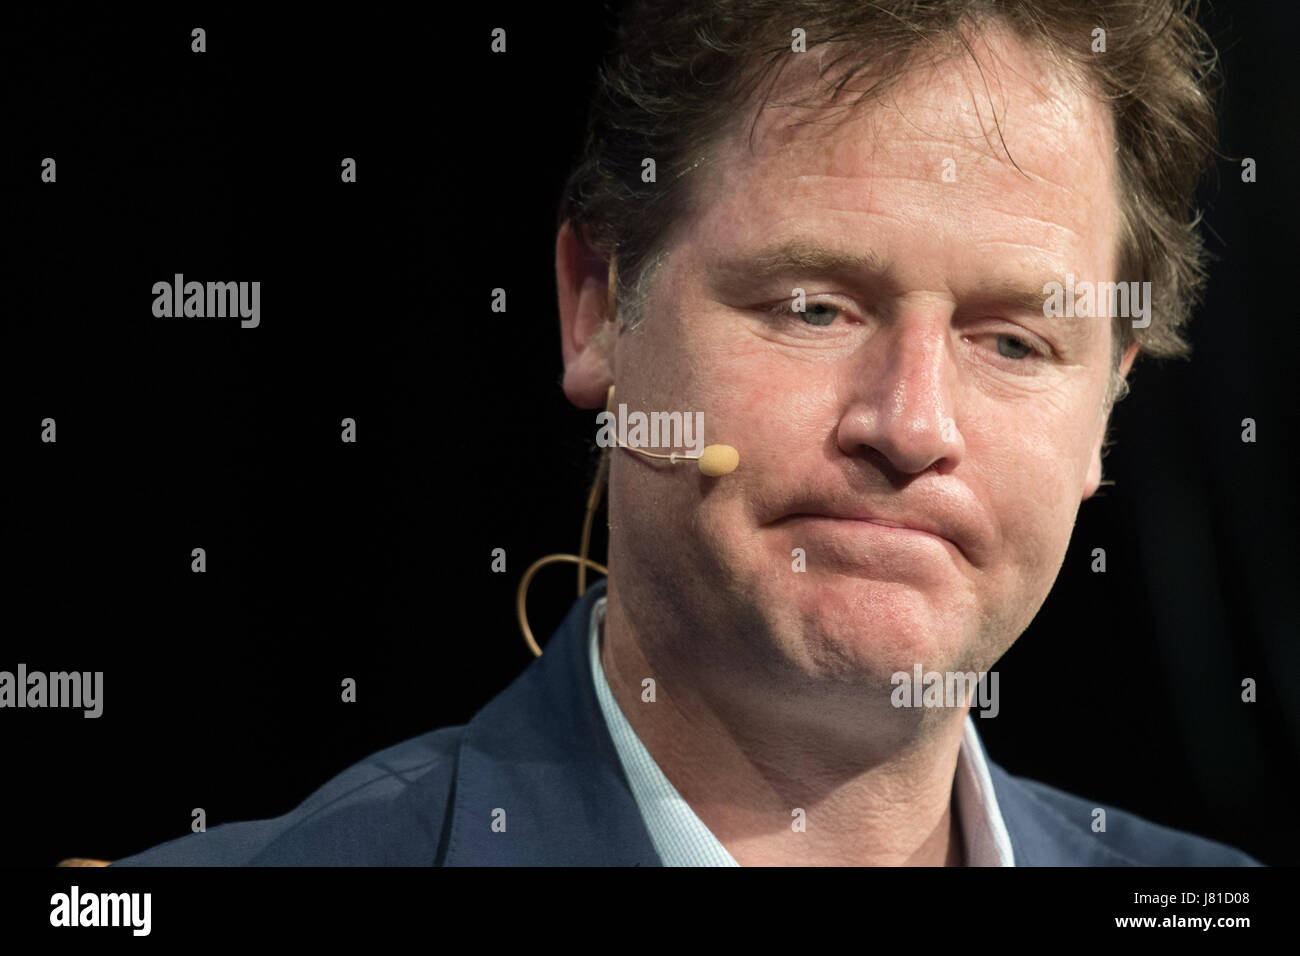 Hay on Wye, Wales UK, Friday 26 May 2017. Former Deputy Prime Minister NICK CLEGG speaking about the 2010-2015 coalition government at the Hay Festival - which is this yer celebrating it's 30th anniversary. Temperatures in many parts of the UK will reach the high 20's centigrade today, before thundery weather rolls in from the west overnight and tomorrow morning Credit: keith morris/Alamy Live News Stock Photo